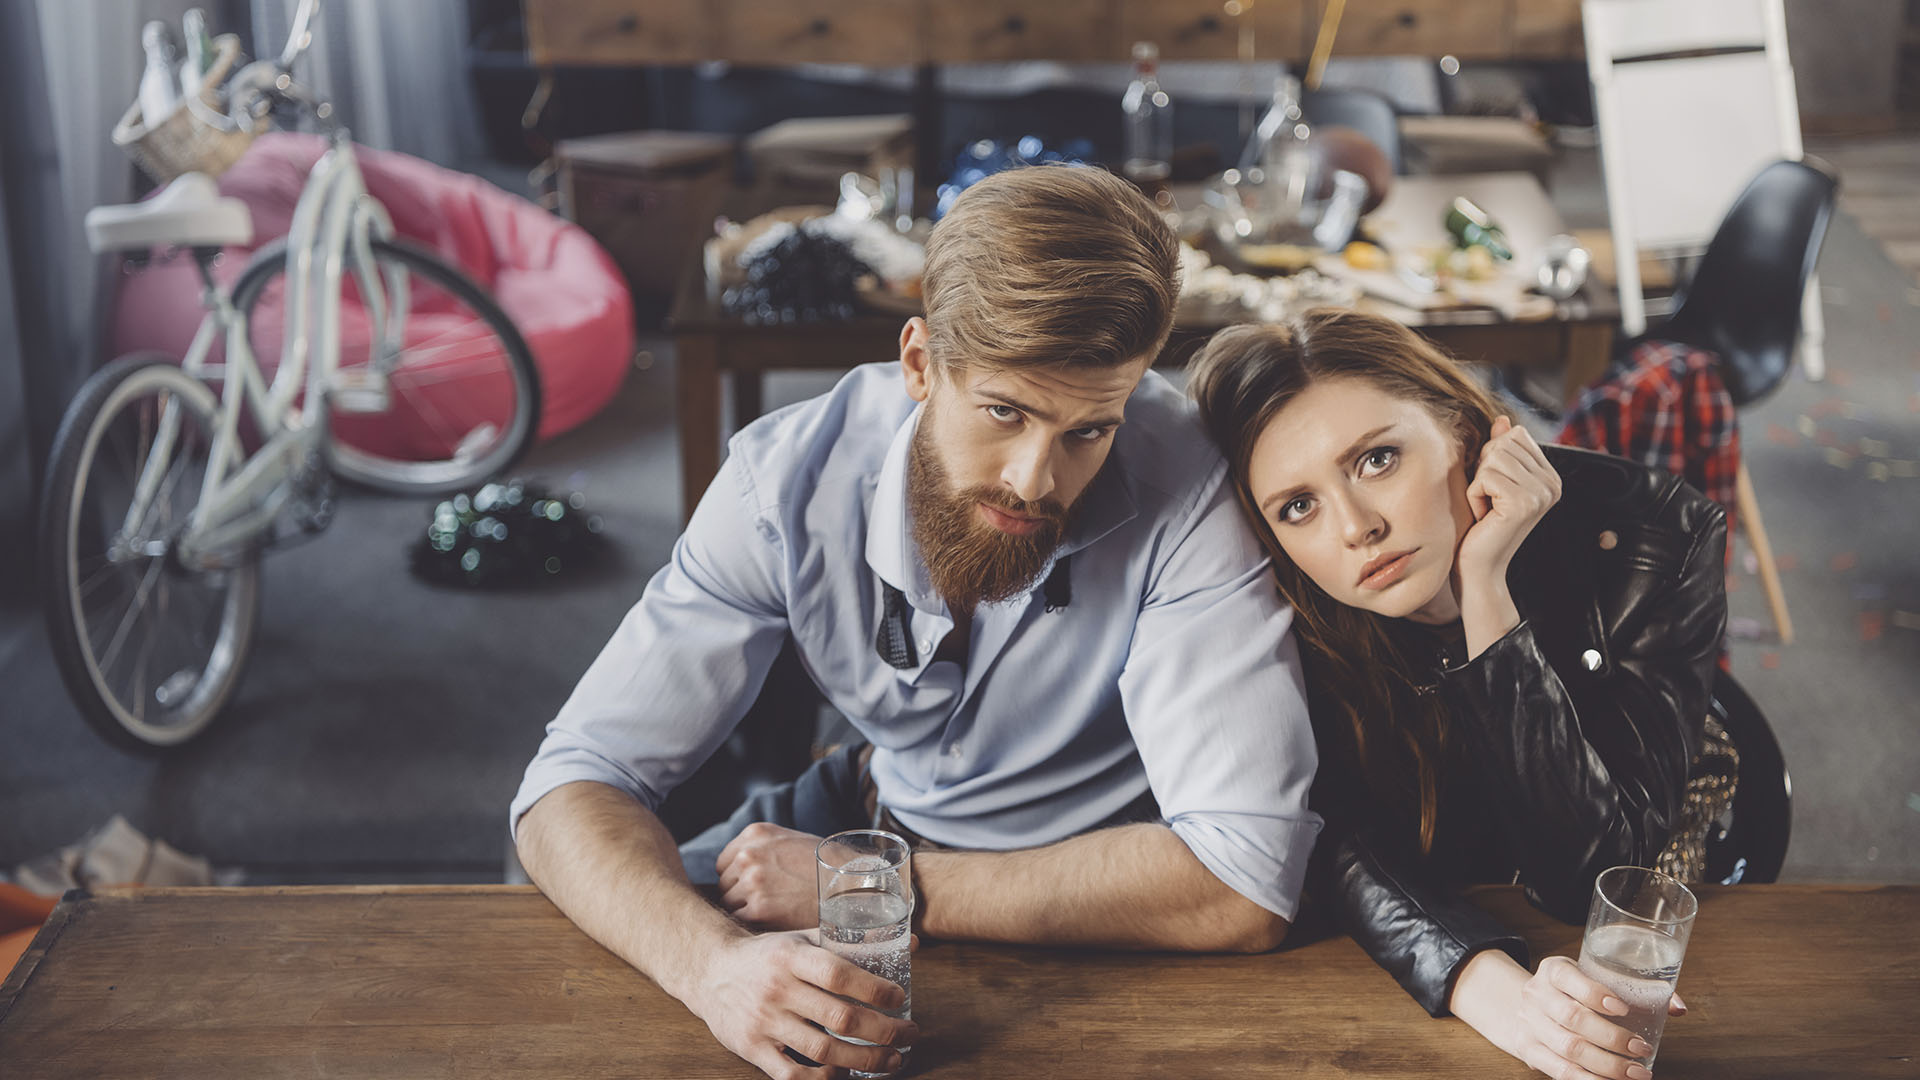 A man and woman sit at a table holding glasses of water, surrounded by a messy background that includes a bicycle, open bottles, and scattered objects. Is renting ruining your future?